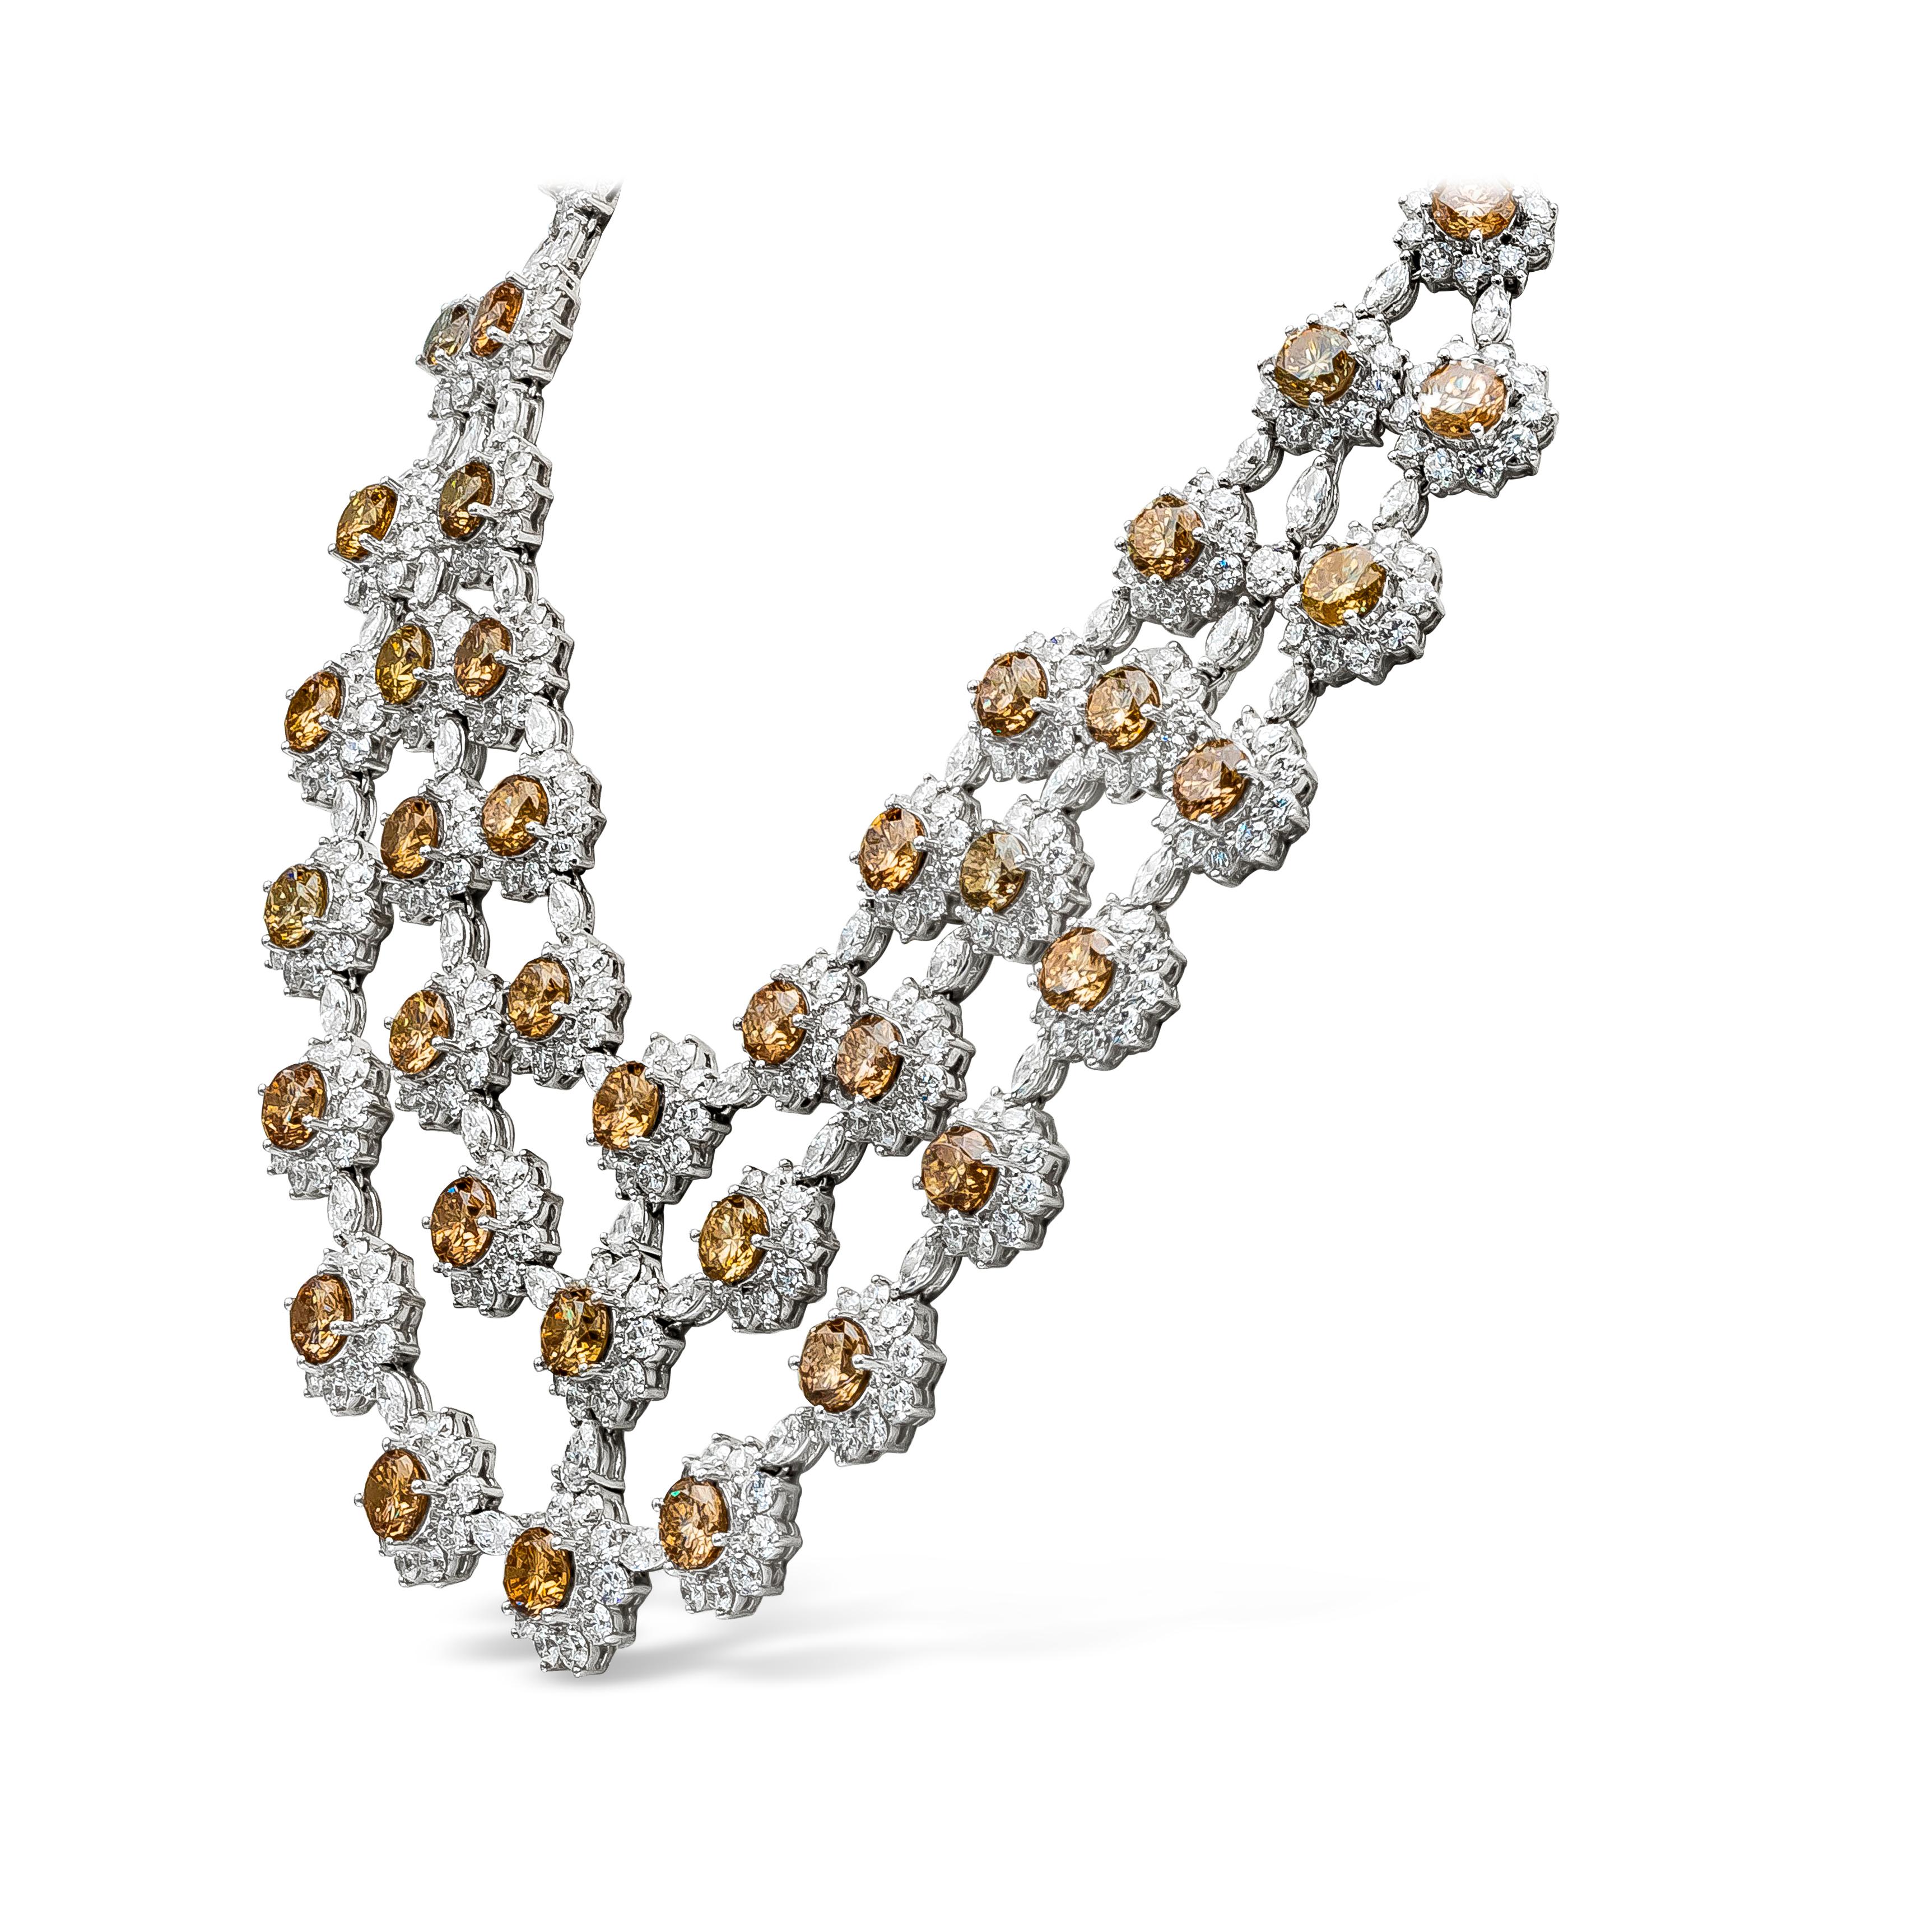 This beautiful necklace features 47 natural brown round diamonds weighing 68.57 carat total. Each brown diamond surrounded by a cluster of white round diamonds in a floral motif and spaced by white marquise diamonds. Total weight of white diamonds